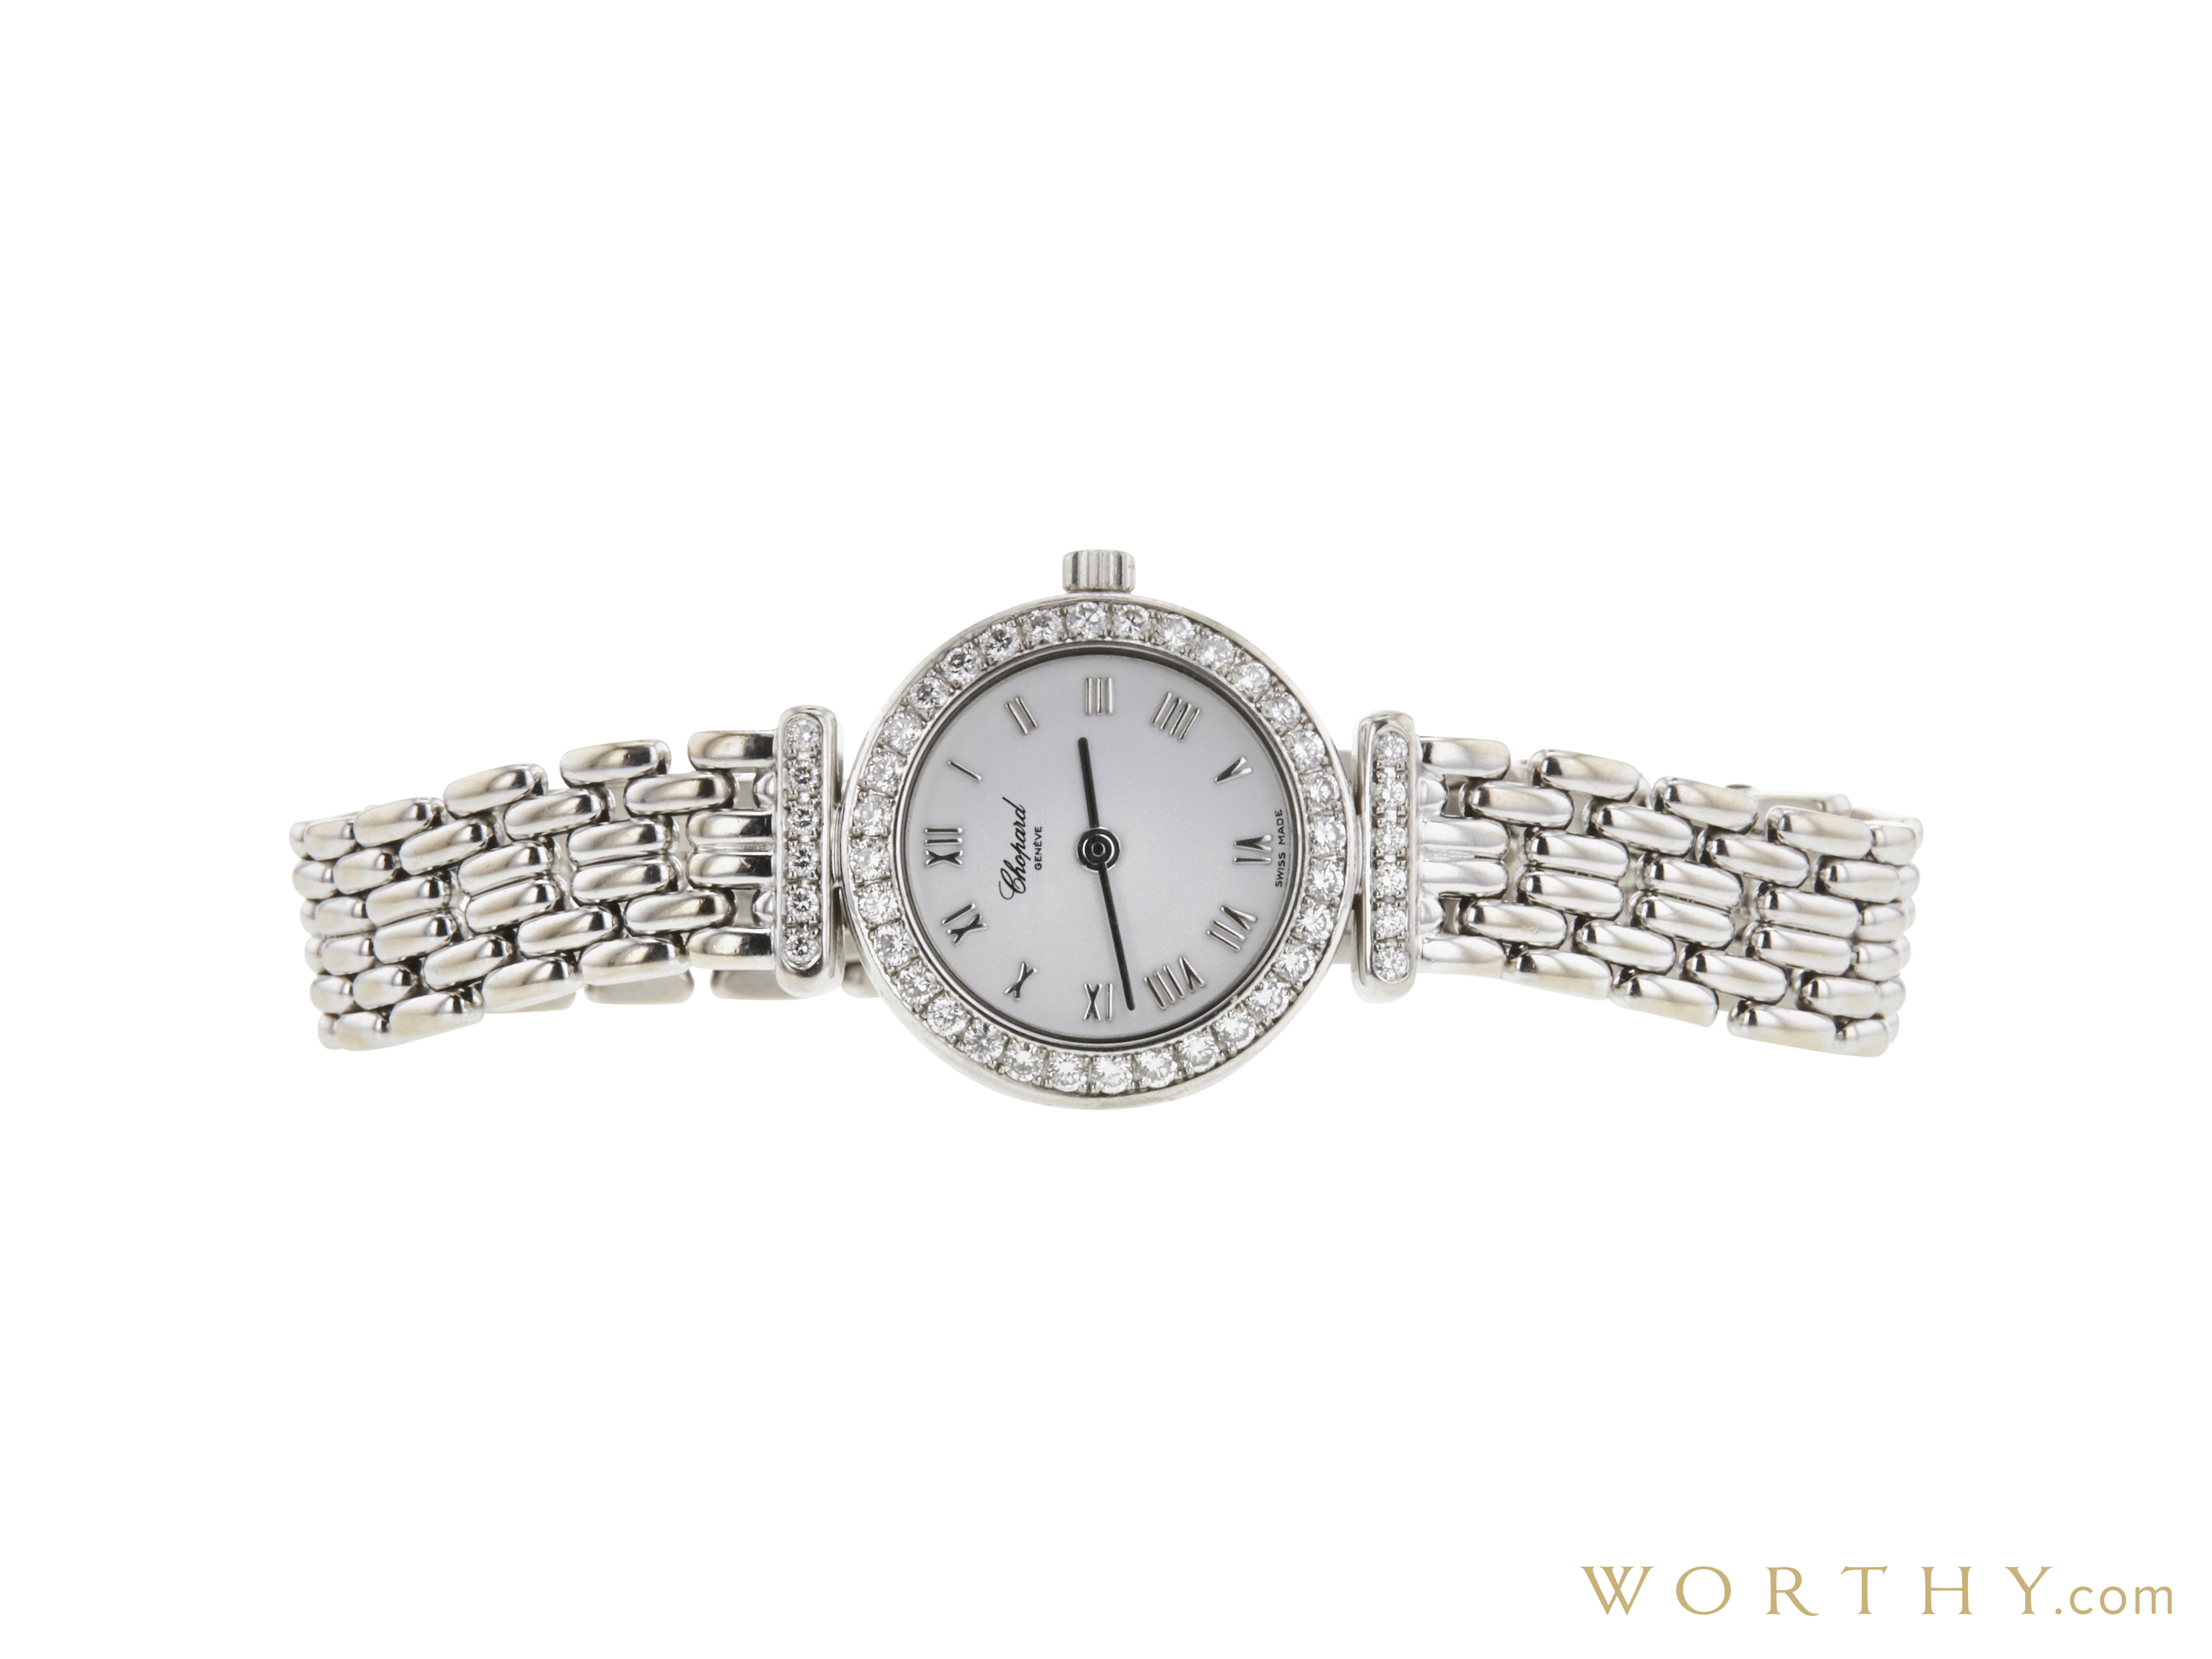 Chopard 911 531158 | Sold For $1,600 | Worthy.com